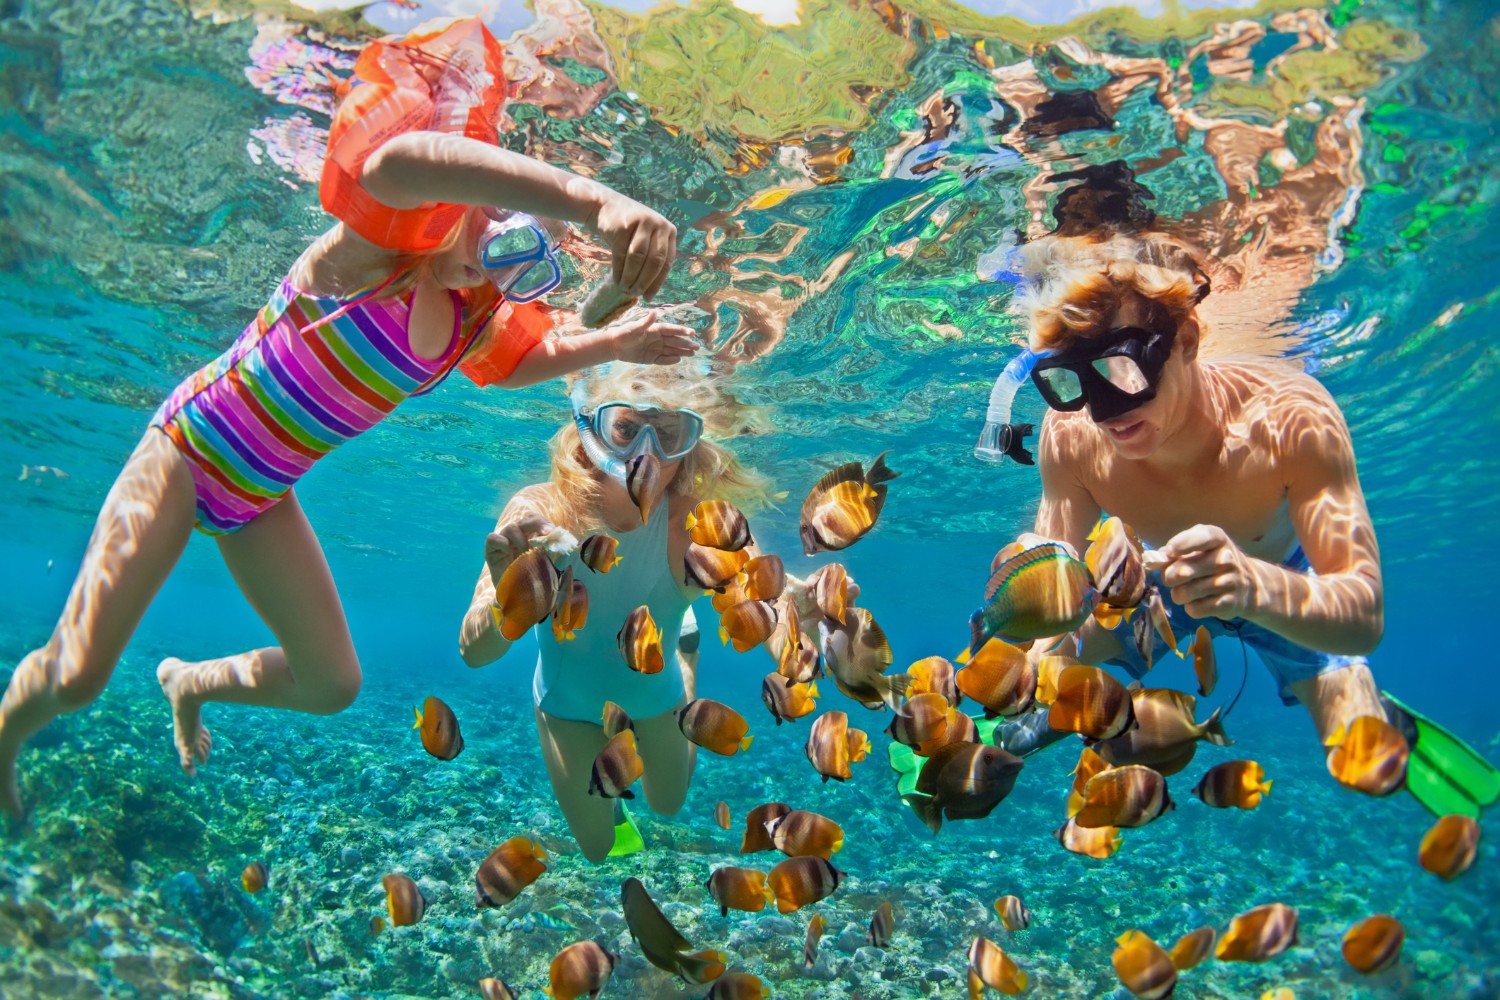 3 Places for Fort Lauderdale Snorkeling | Things to do in Florida